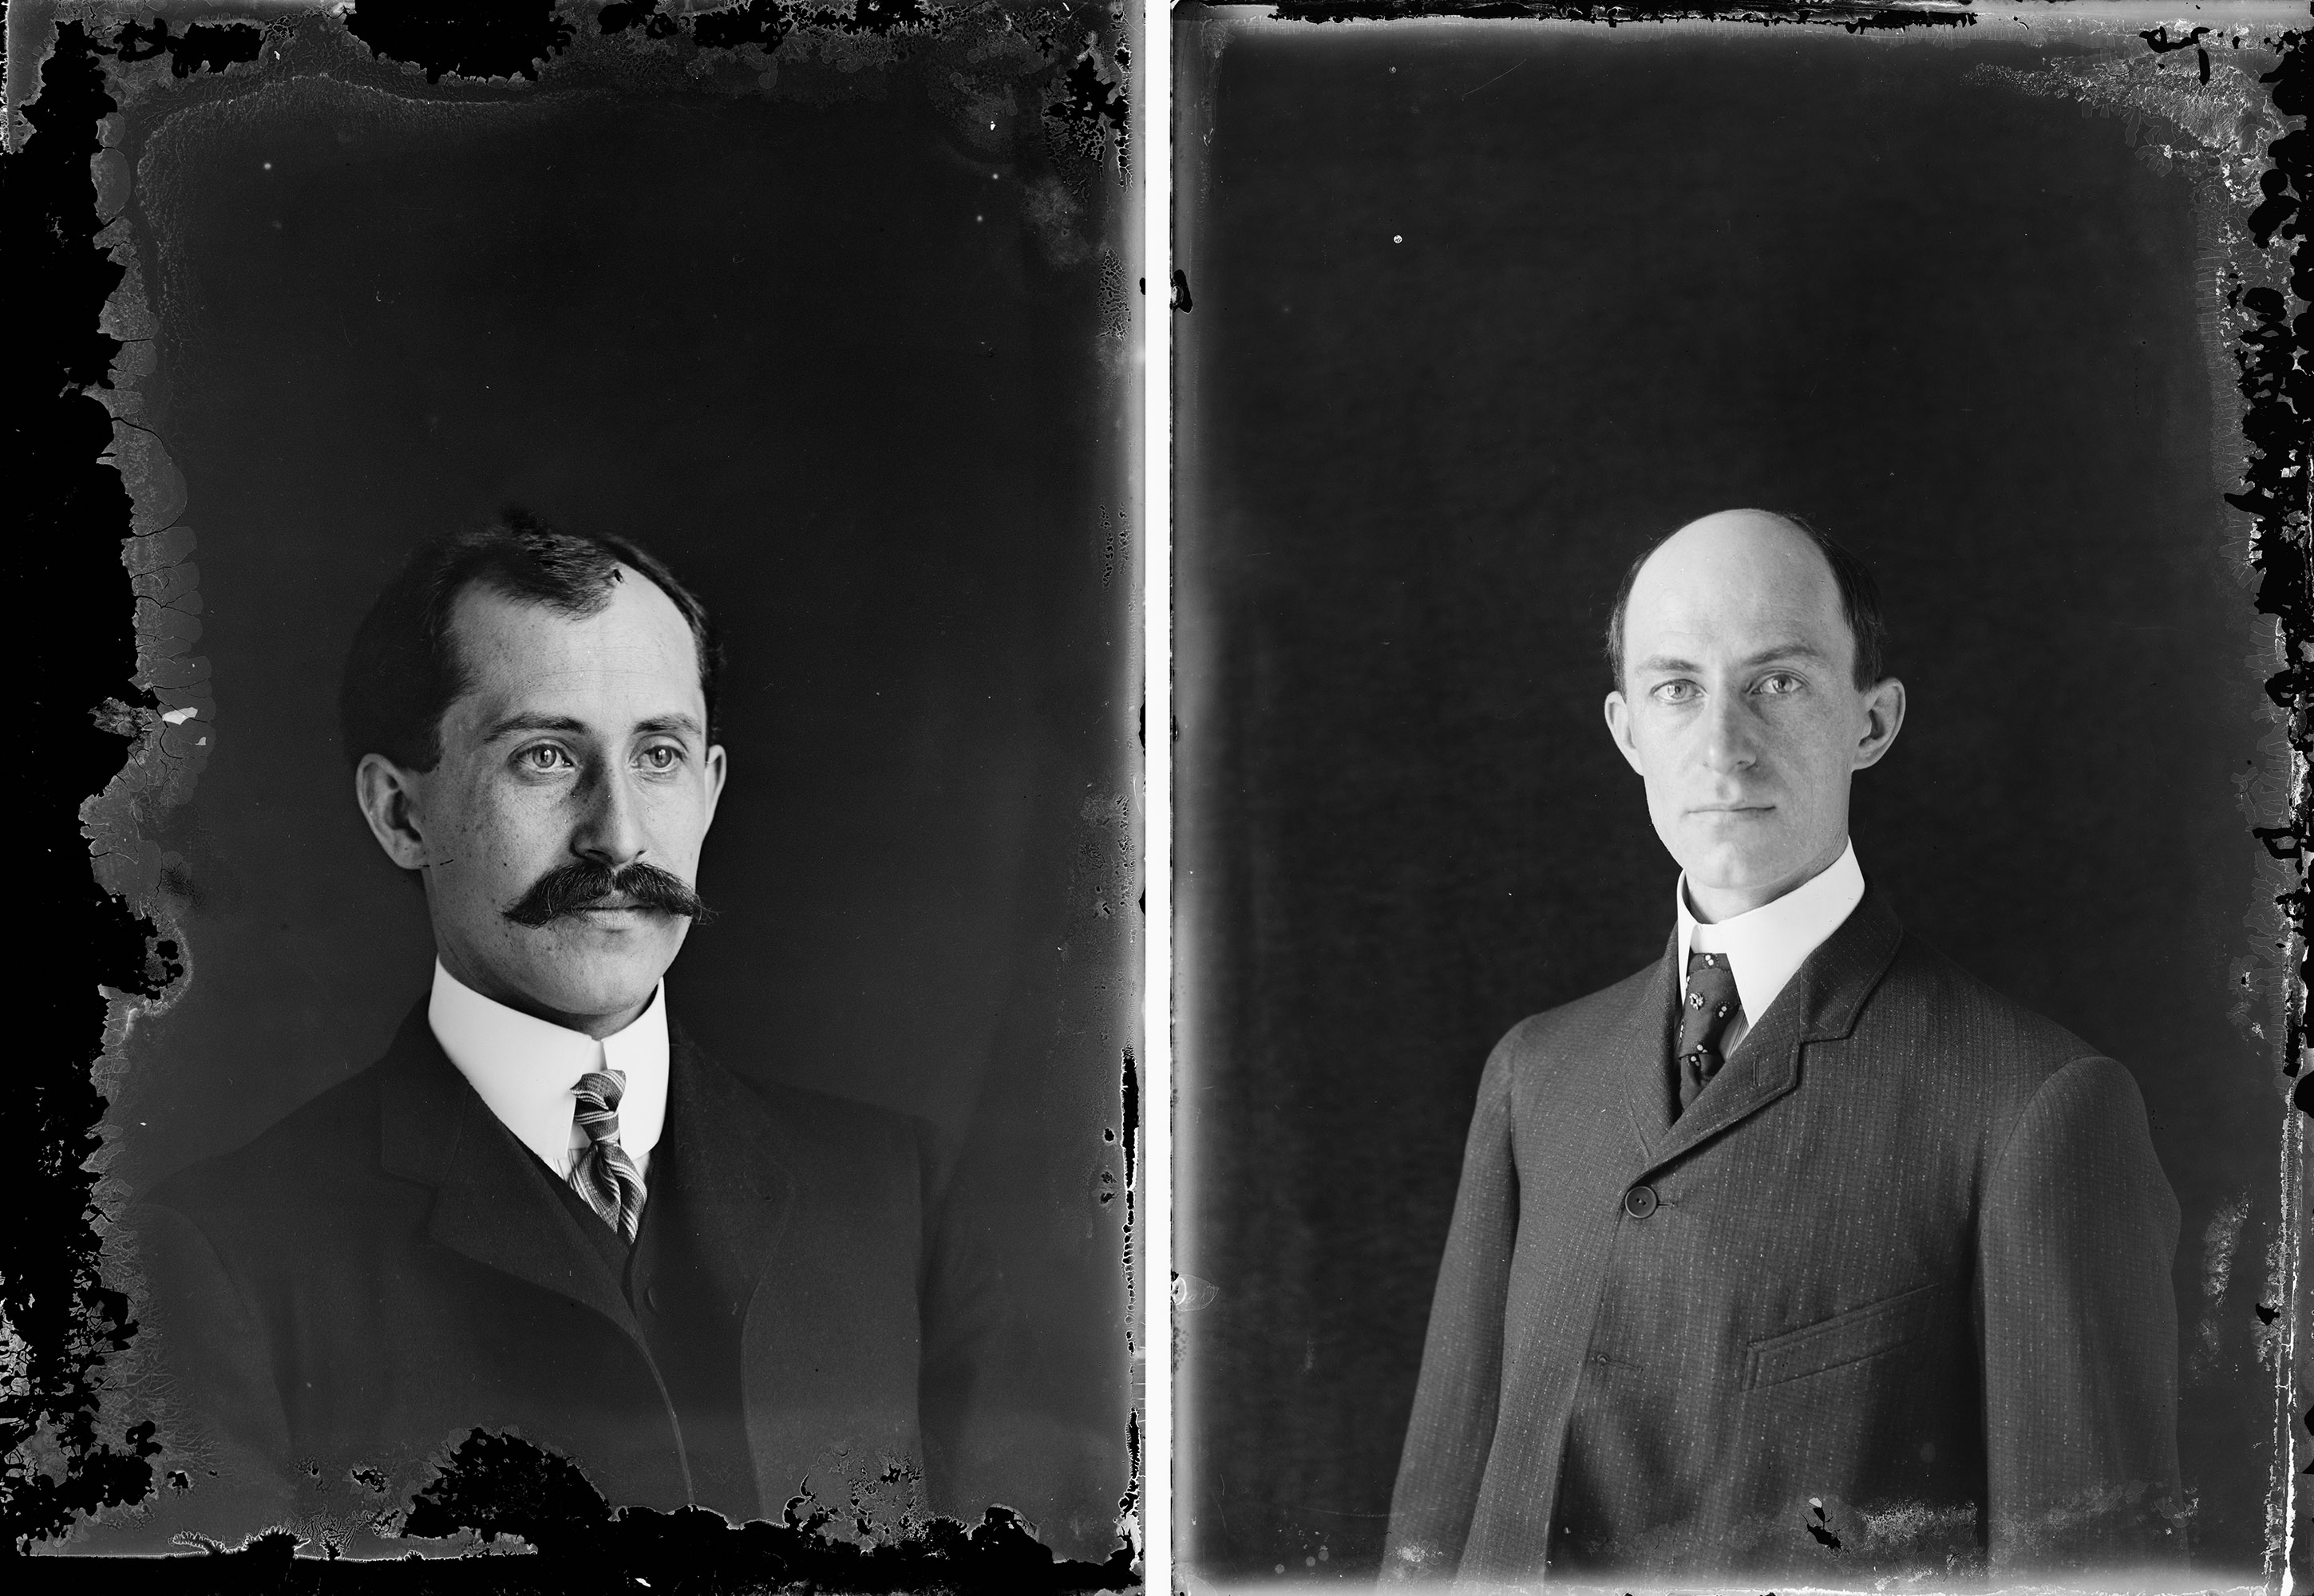 Dry plate, glass negatives from 1905 of Orville Wright at age 34 and Wilbur Wright at 38. (Library of Congress Prints and Photographs Division)